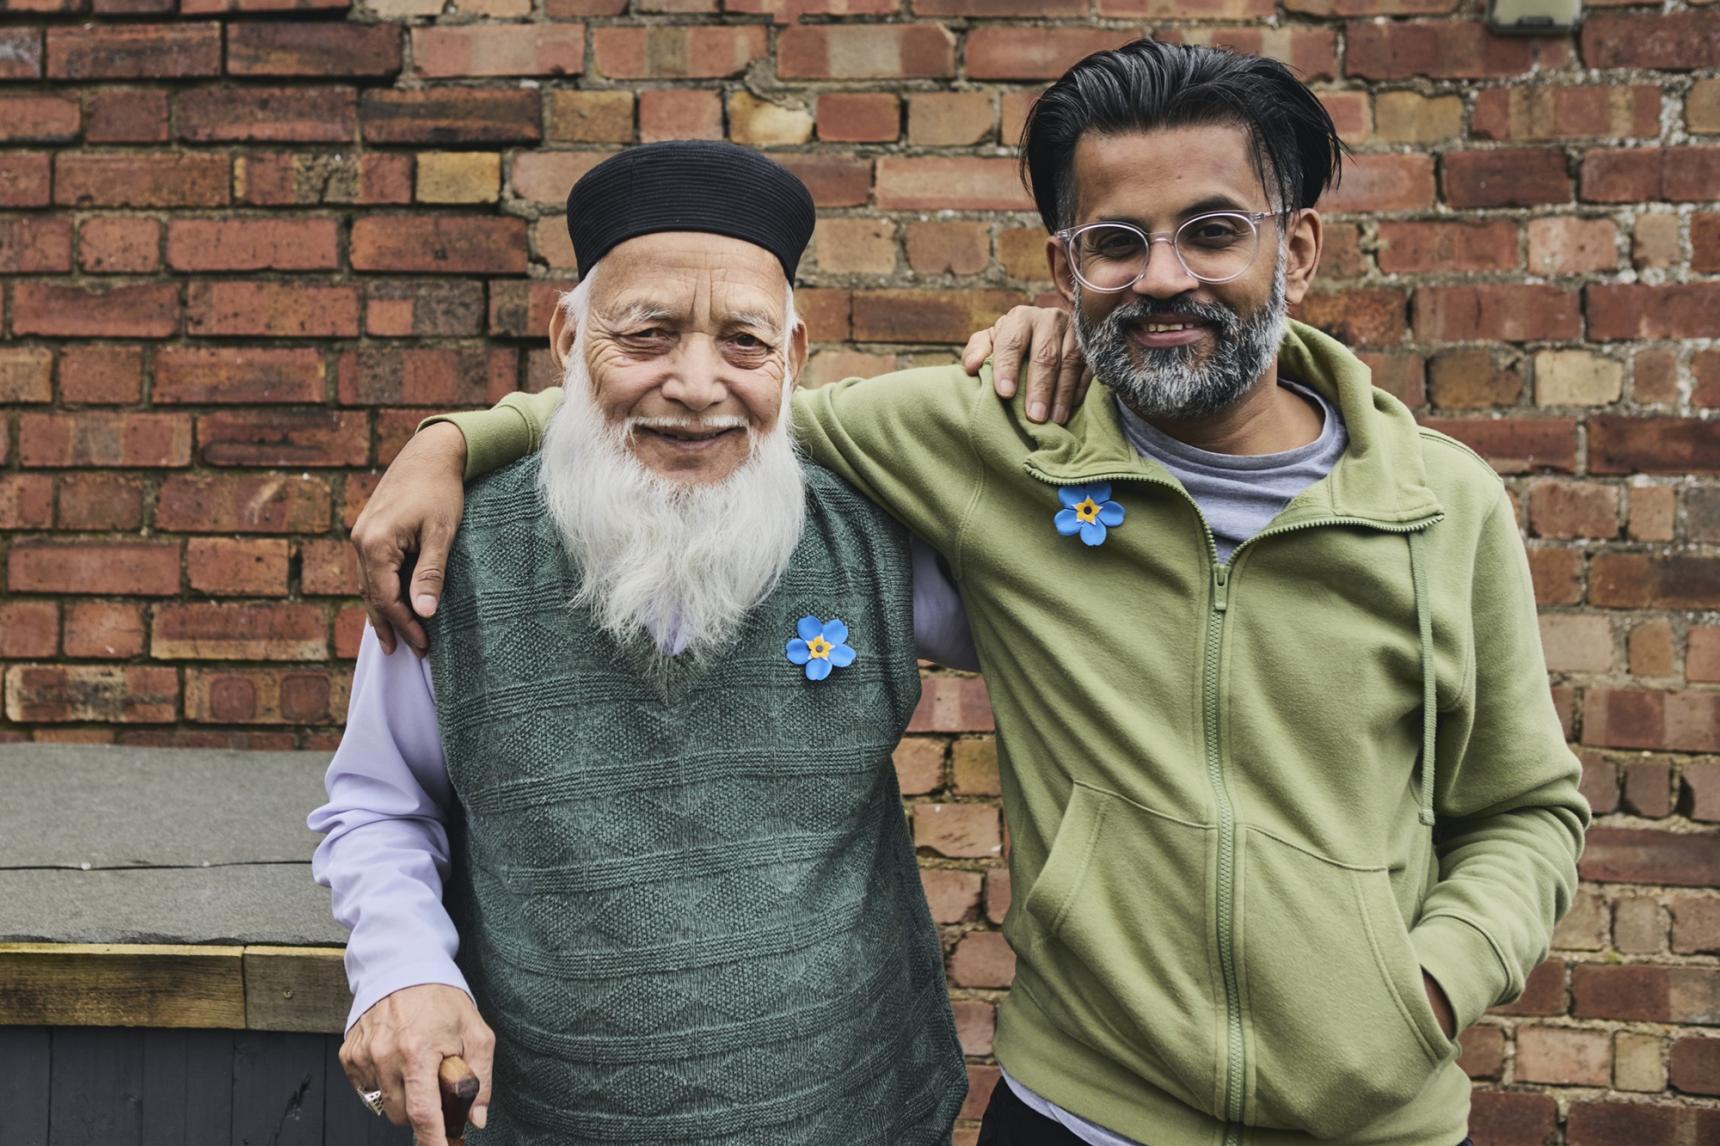 Shahbaz with his dad Mohammed who has dementia